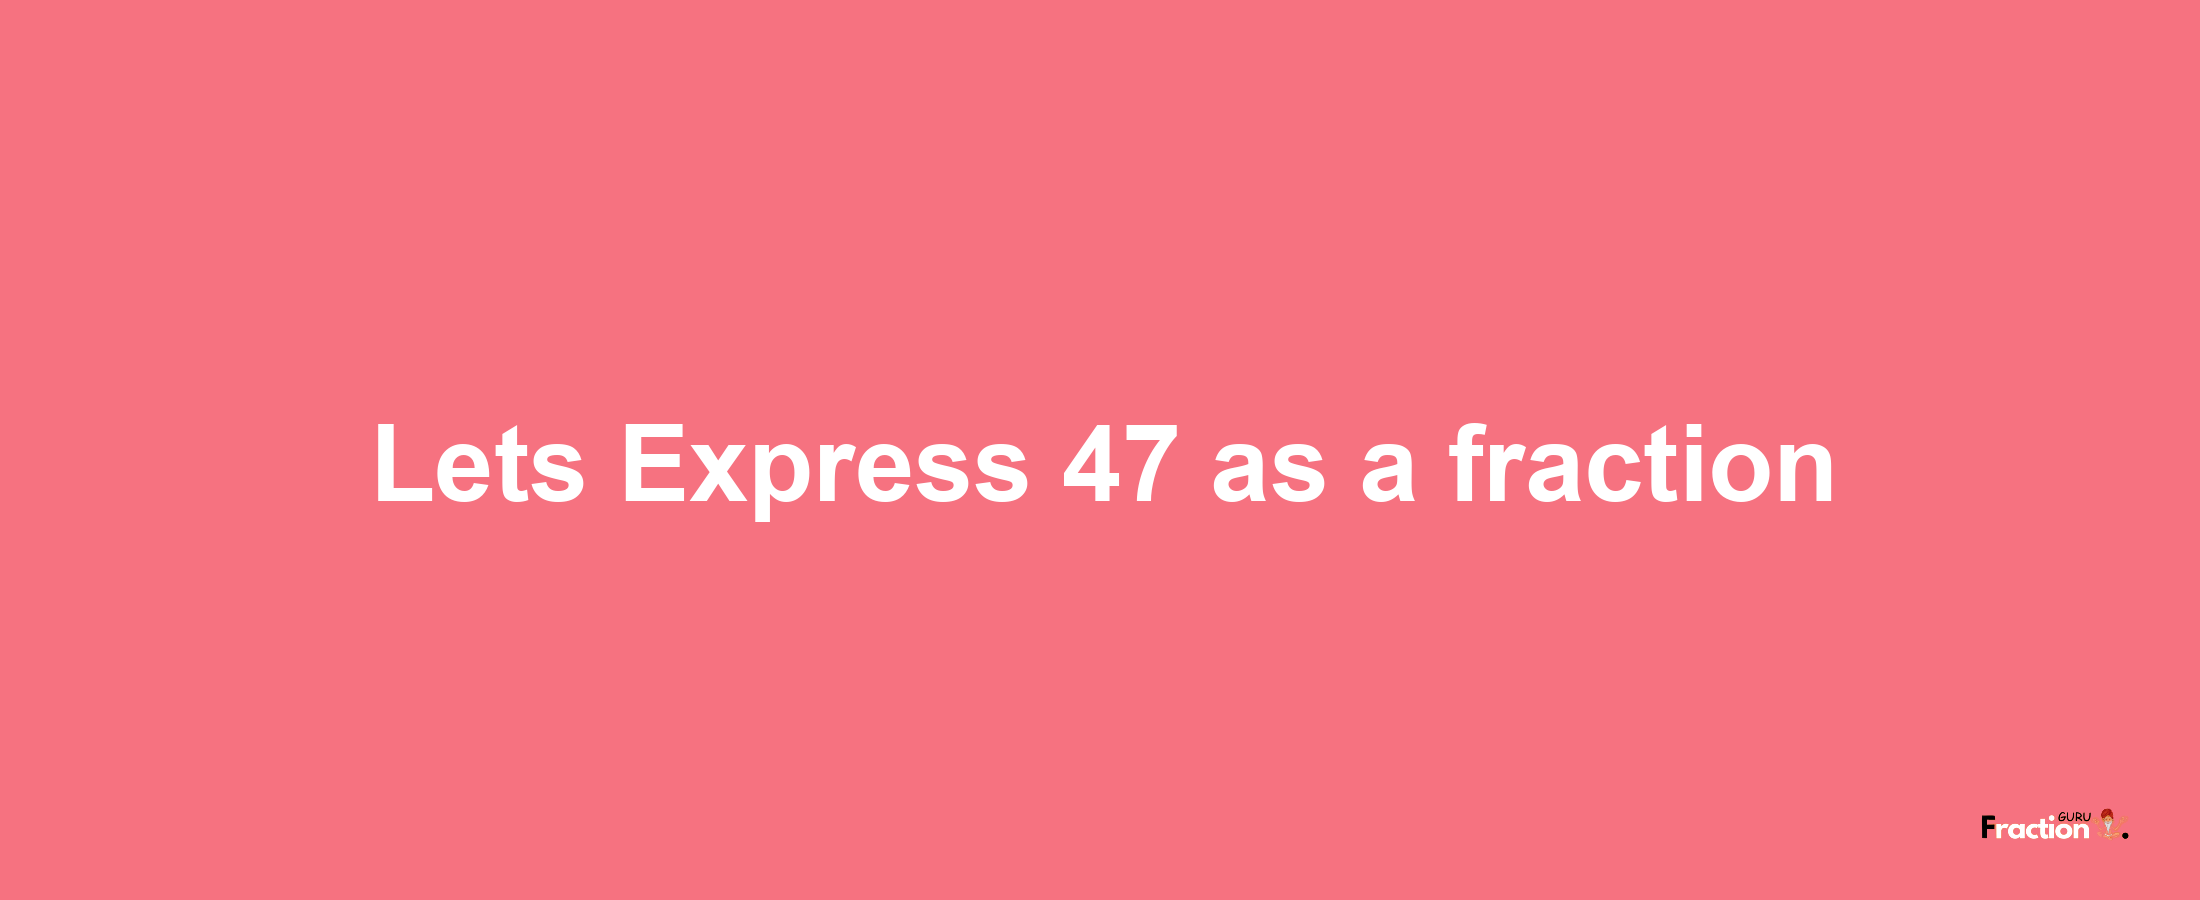 Lets Express 47 as afraction